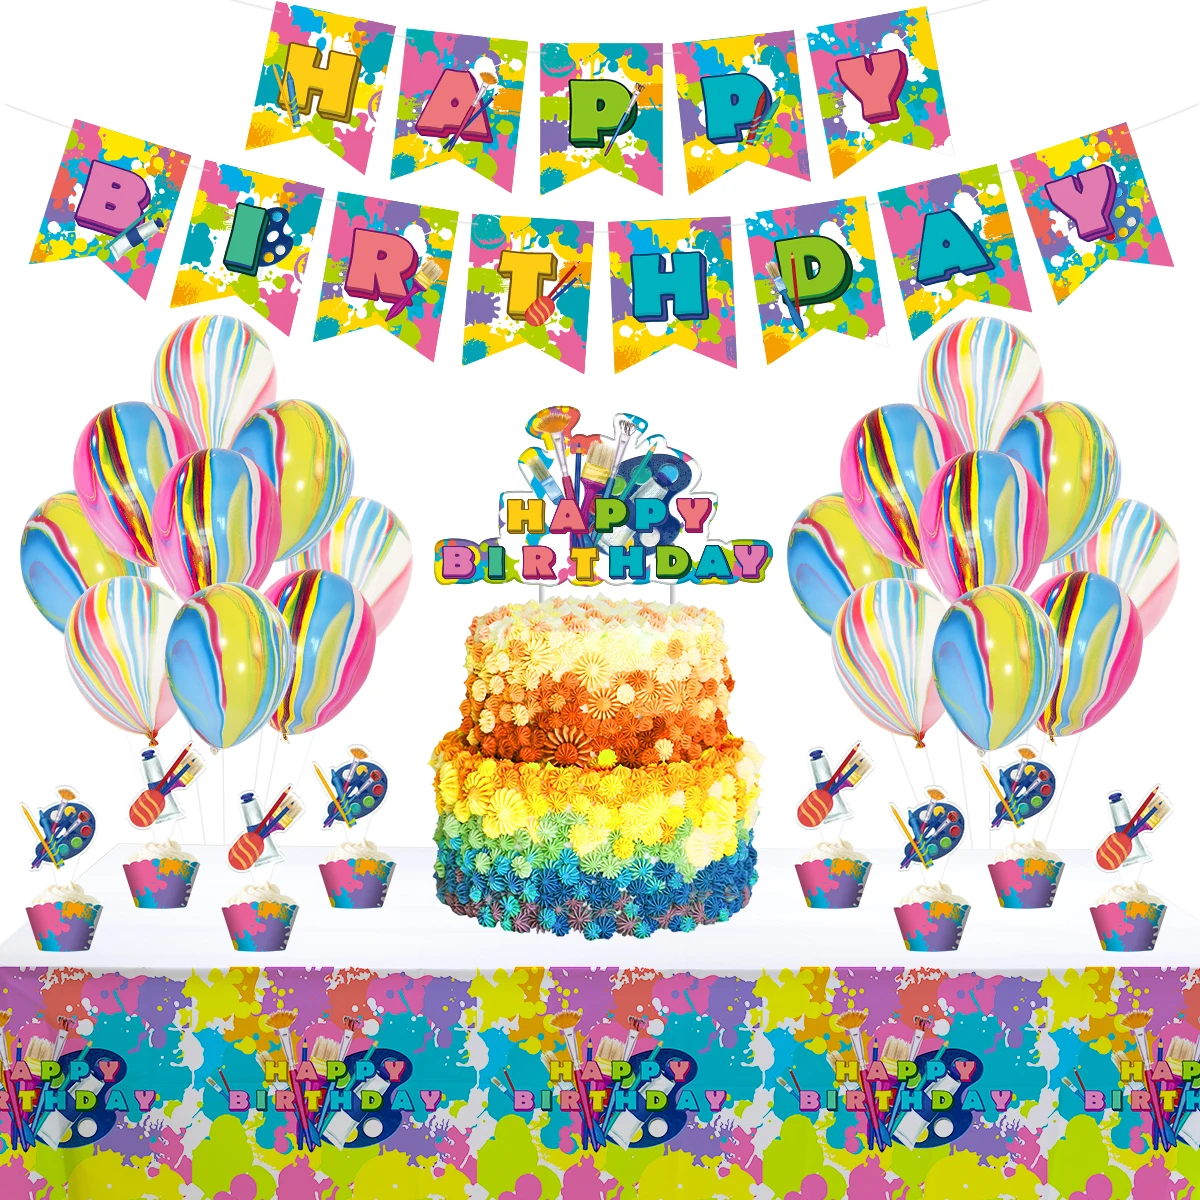 Hats,Confetti Joyin Toy Happy Birthday Decorations Party Supplies Set and Party Decorations All-in-One Pack including Banner Flags Over 100 PC Tablecloth and Plates. Foil Party Balloons 